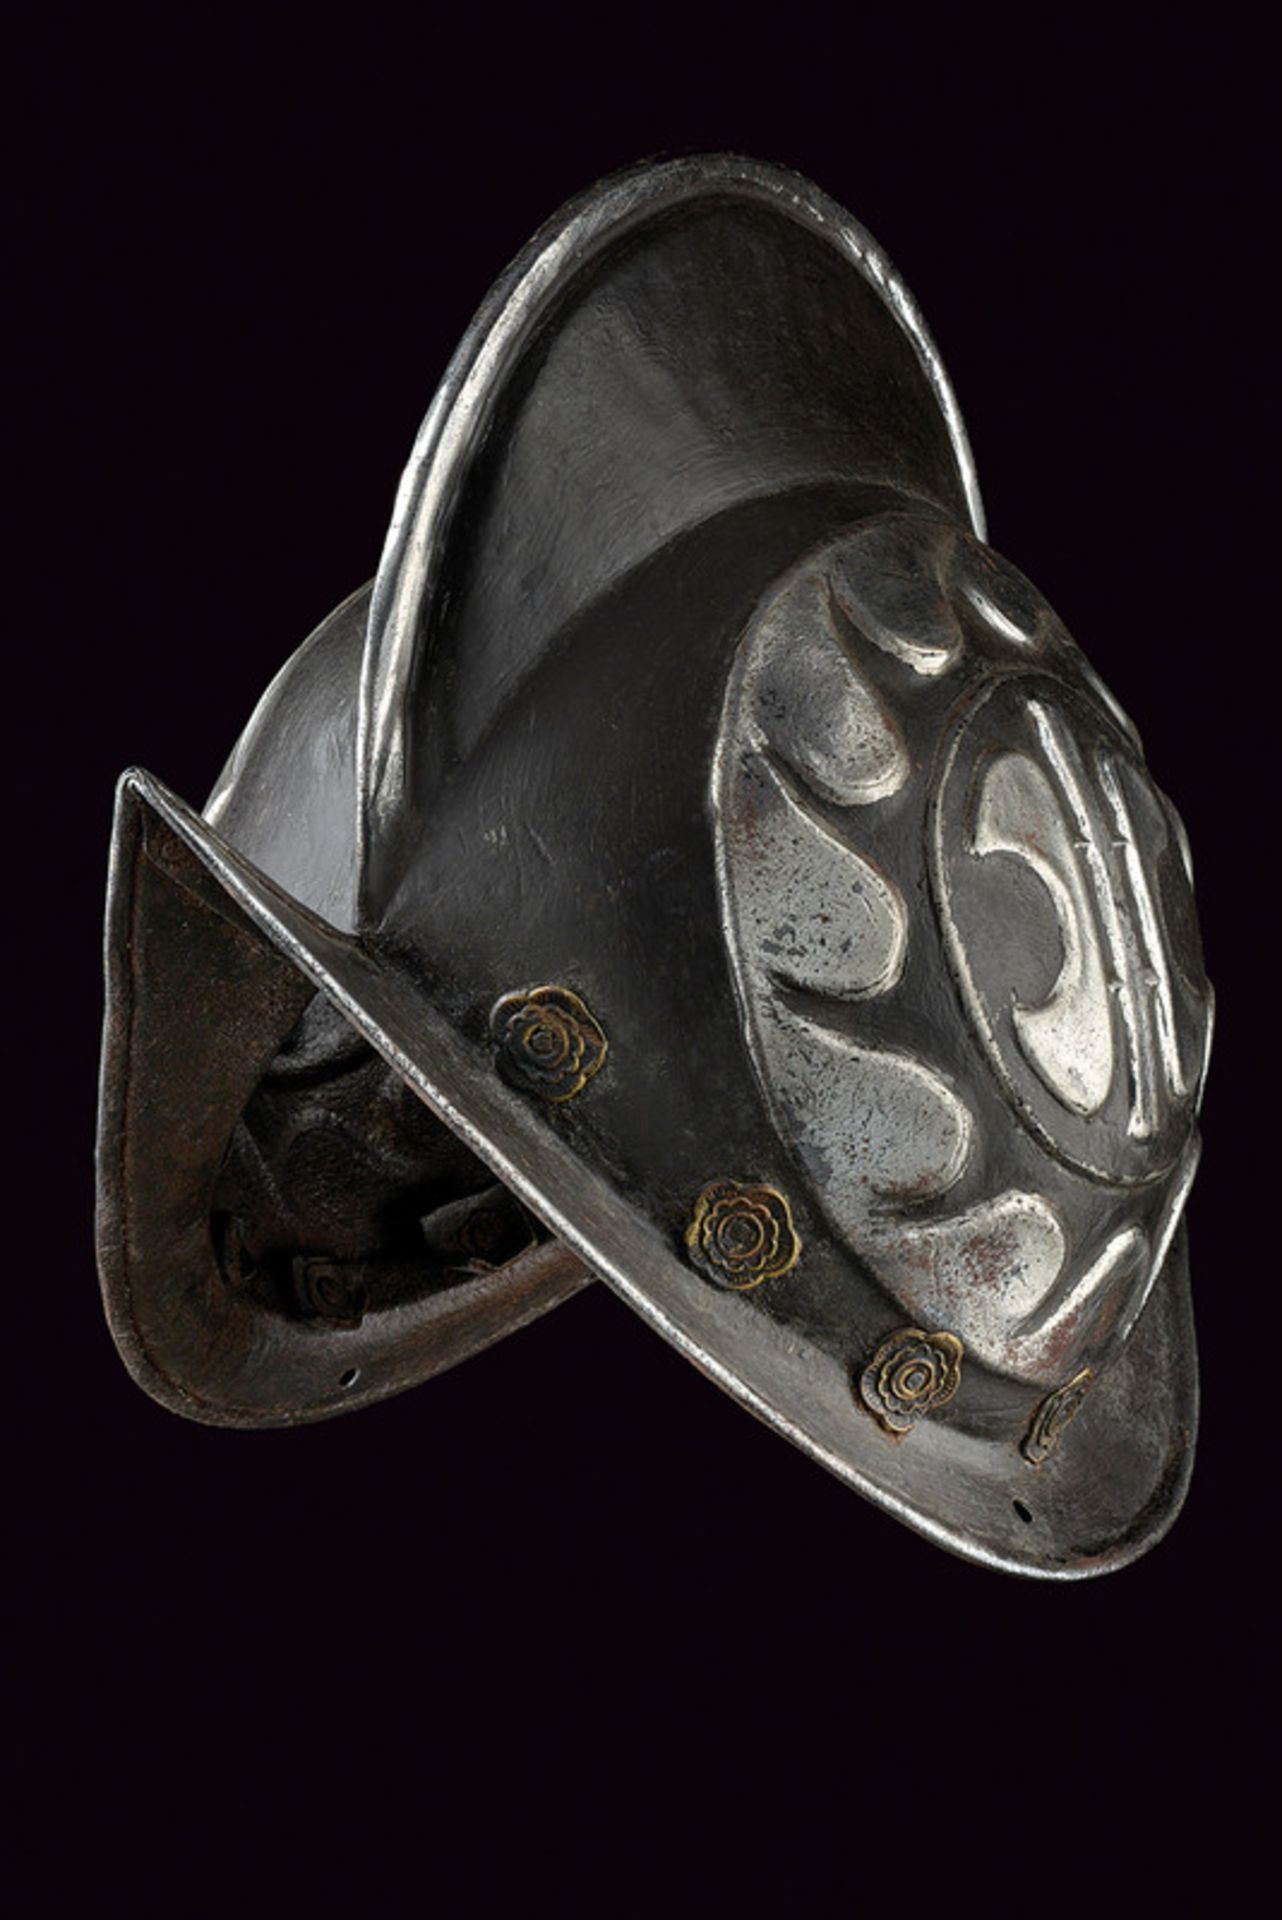 A black and white morion dating: first quarter of the 17th Century provenance: Southern Germany